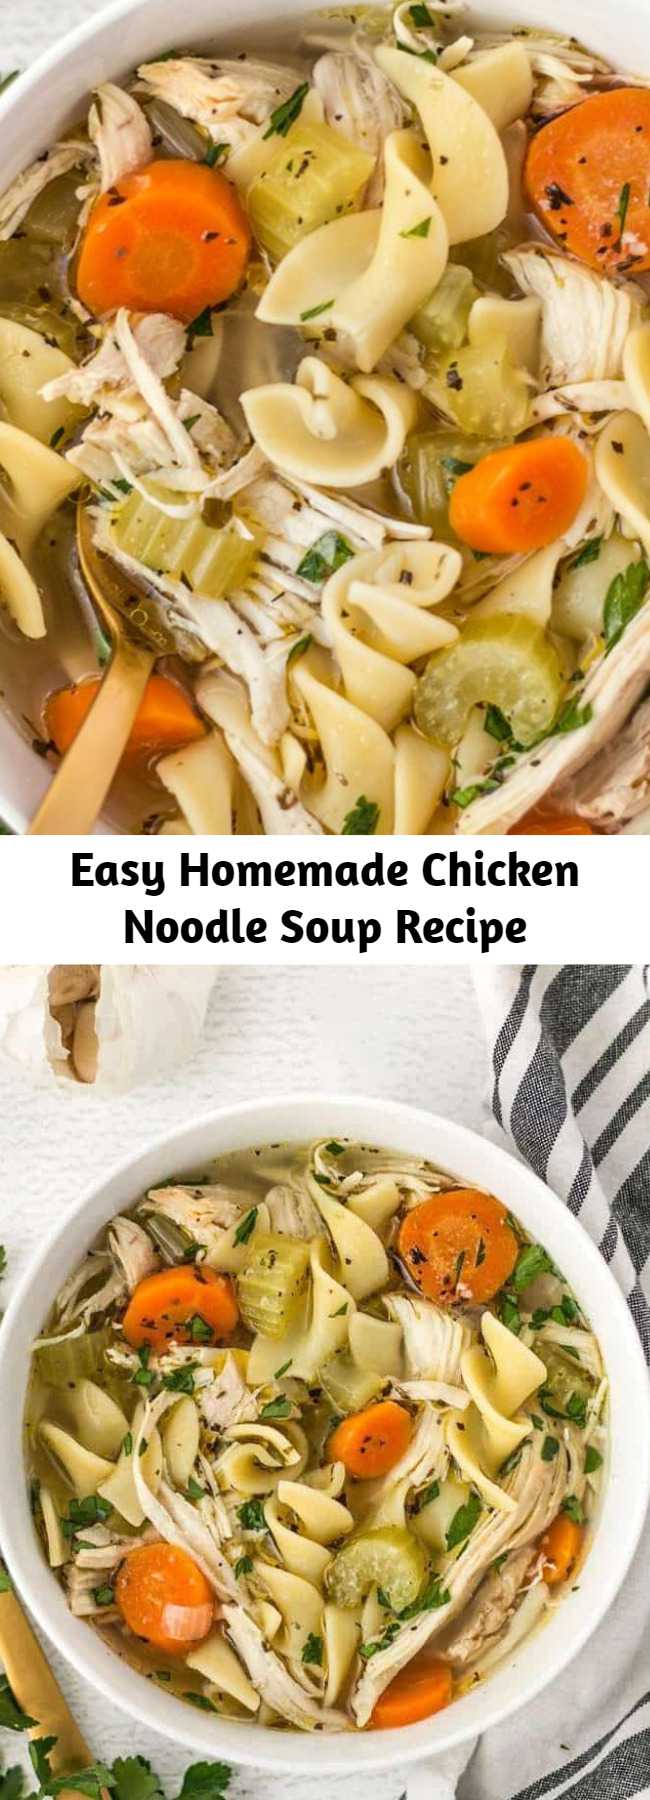 Easy Homemade Chicken Noodle Soup Recipe - This Homemade Chicken Noodle Soup is made 100% from scratch, with plenty of chunky vegetables, herbs, and a homemade broth, just like Grandma used to make! 